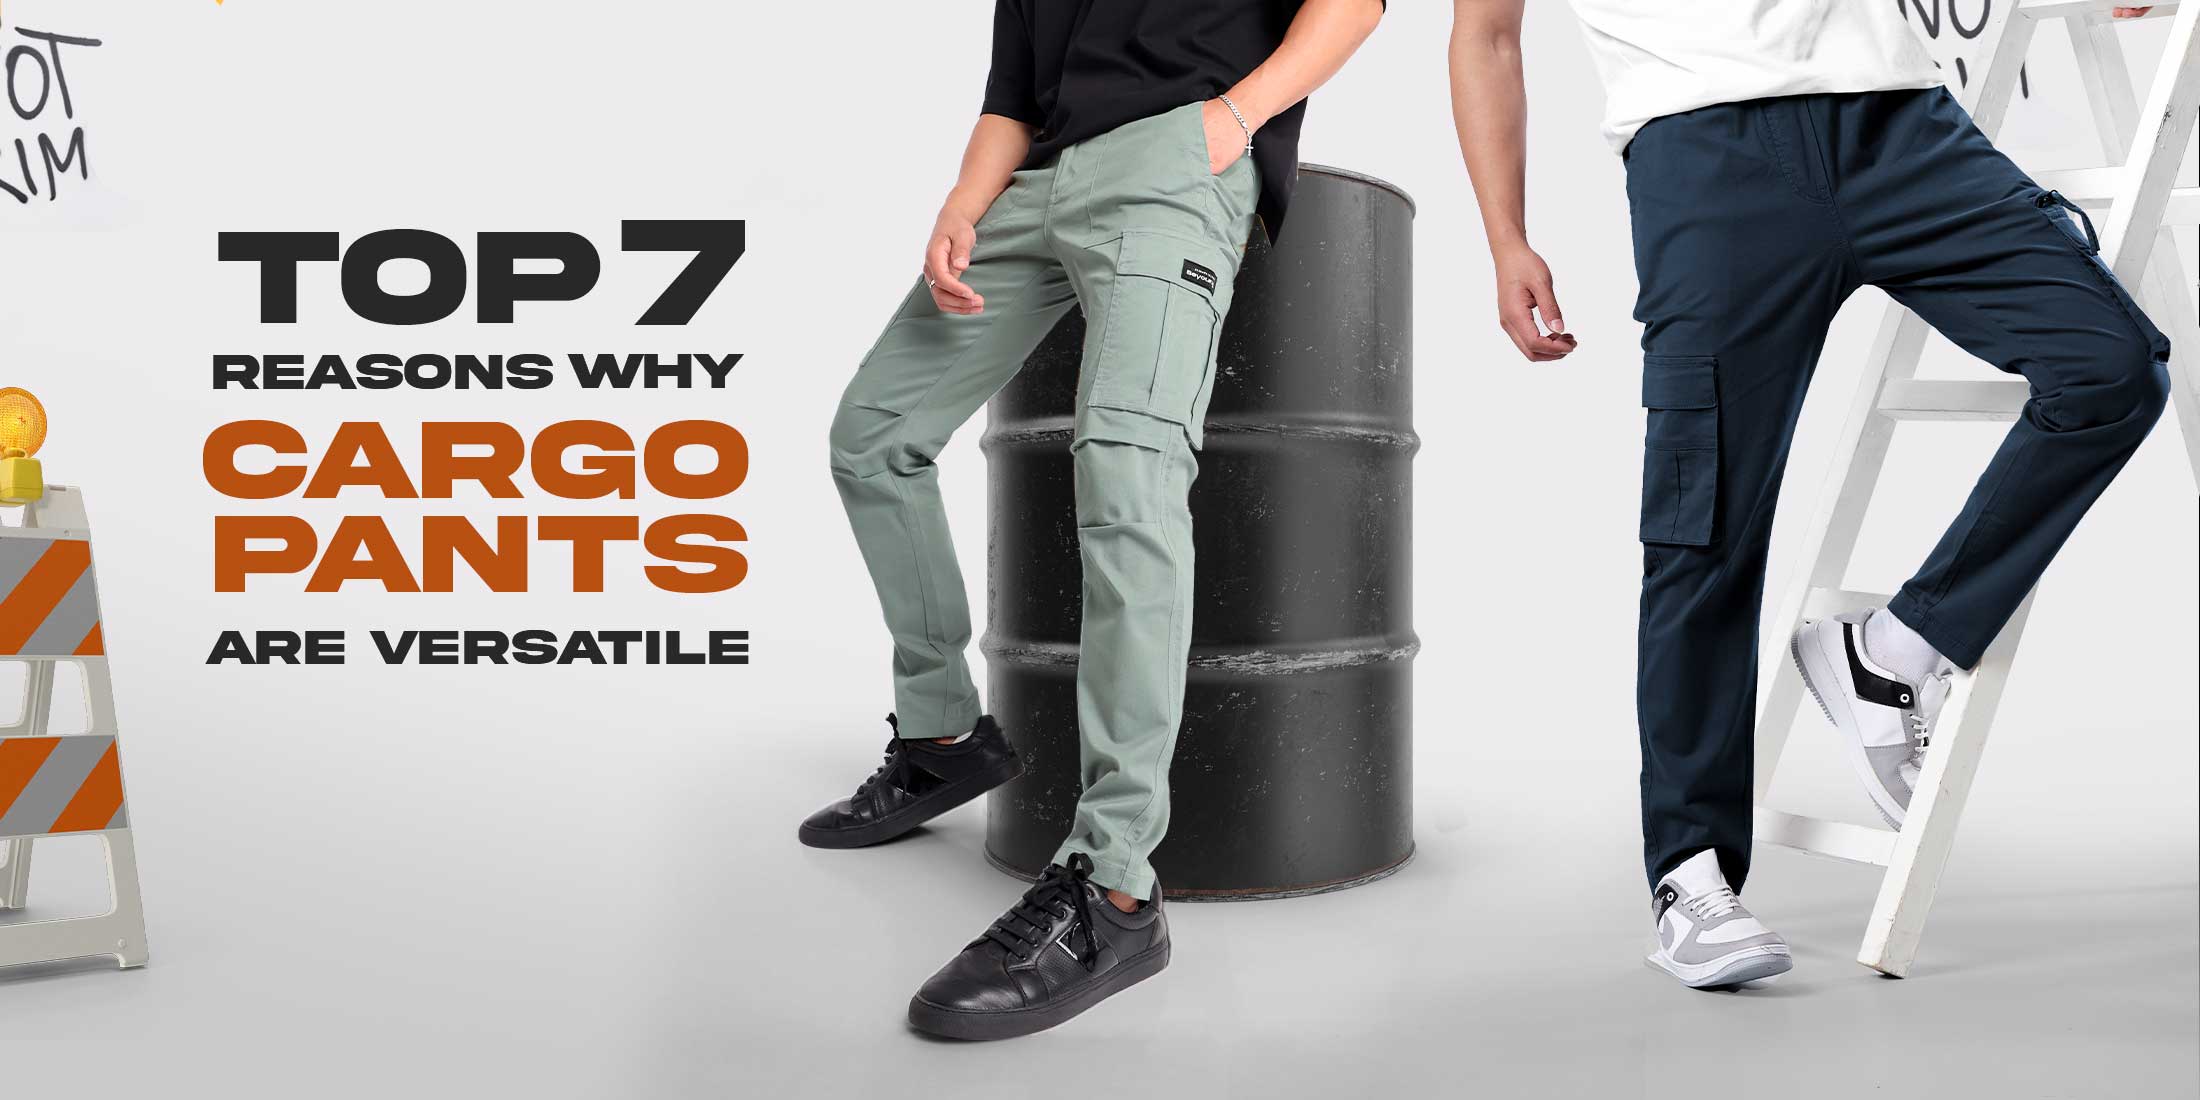 Top 7 Reasons Why Cargo Pants Are Vers …